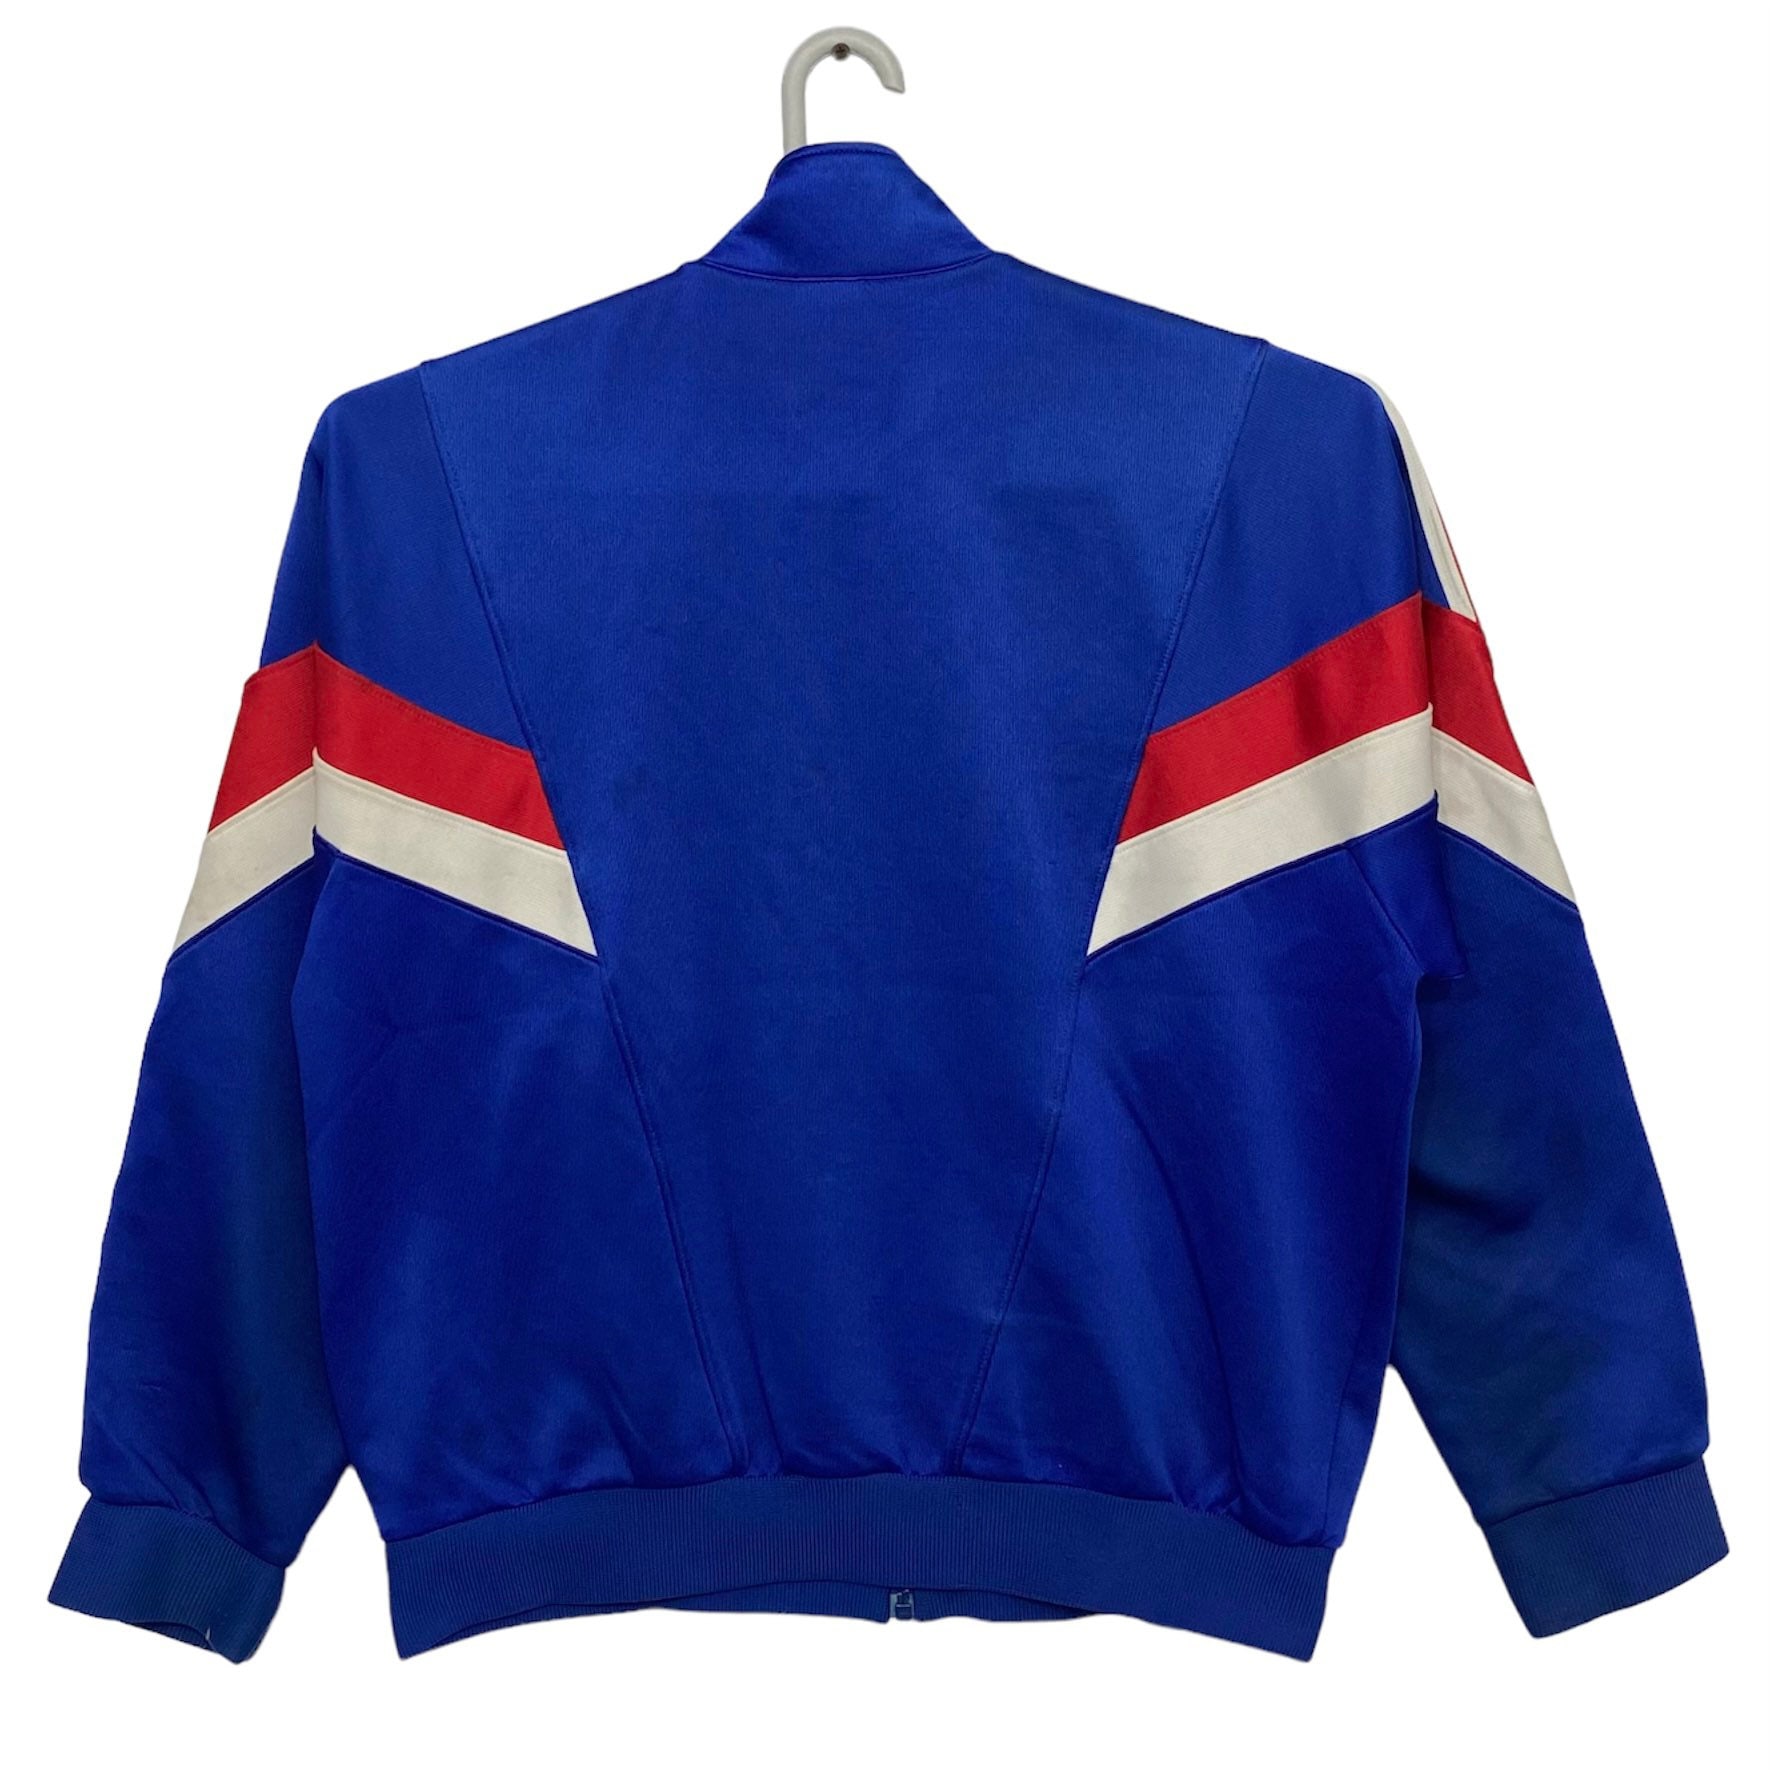 Vintage 80s Adidas Track Jacket Made in Japan Blue Colour M Size